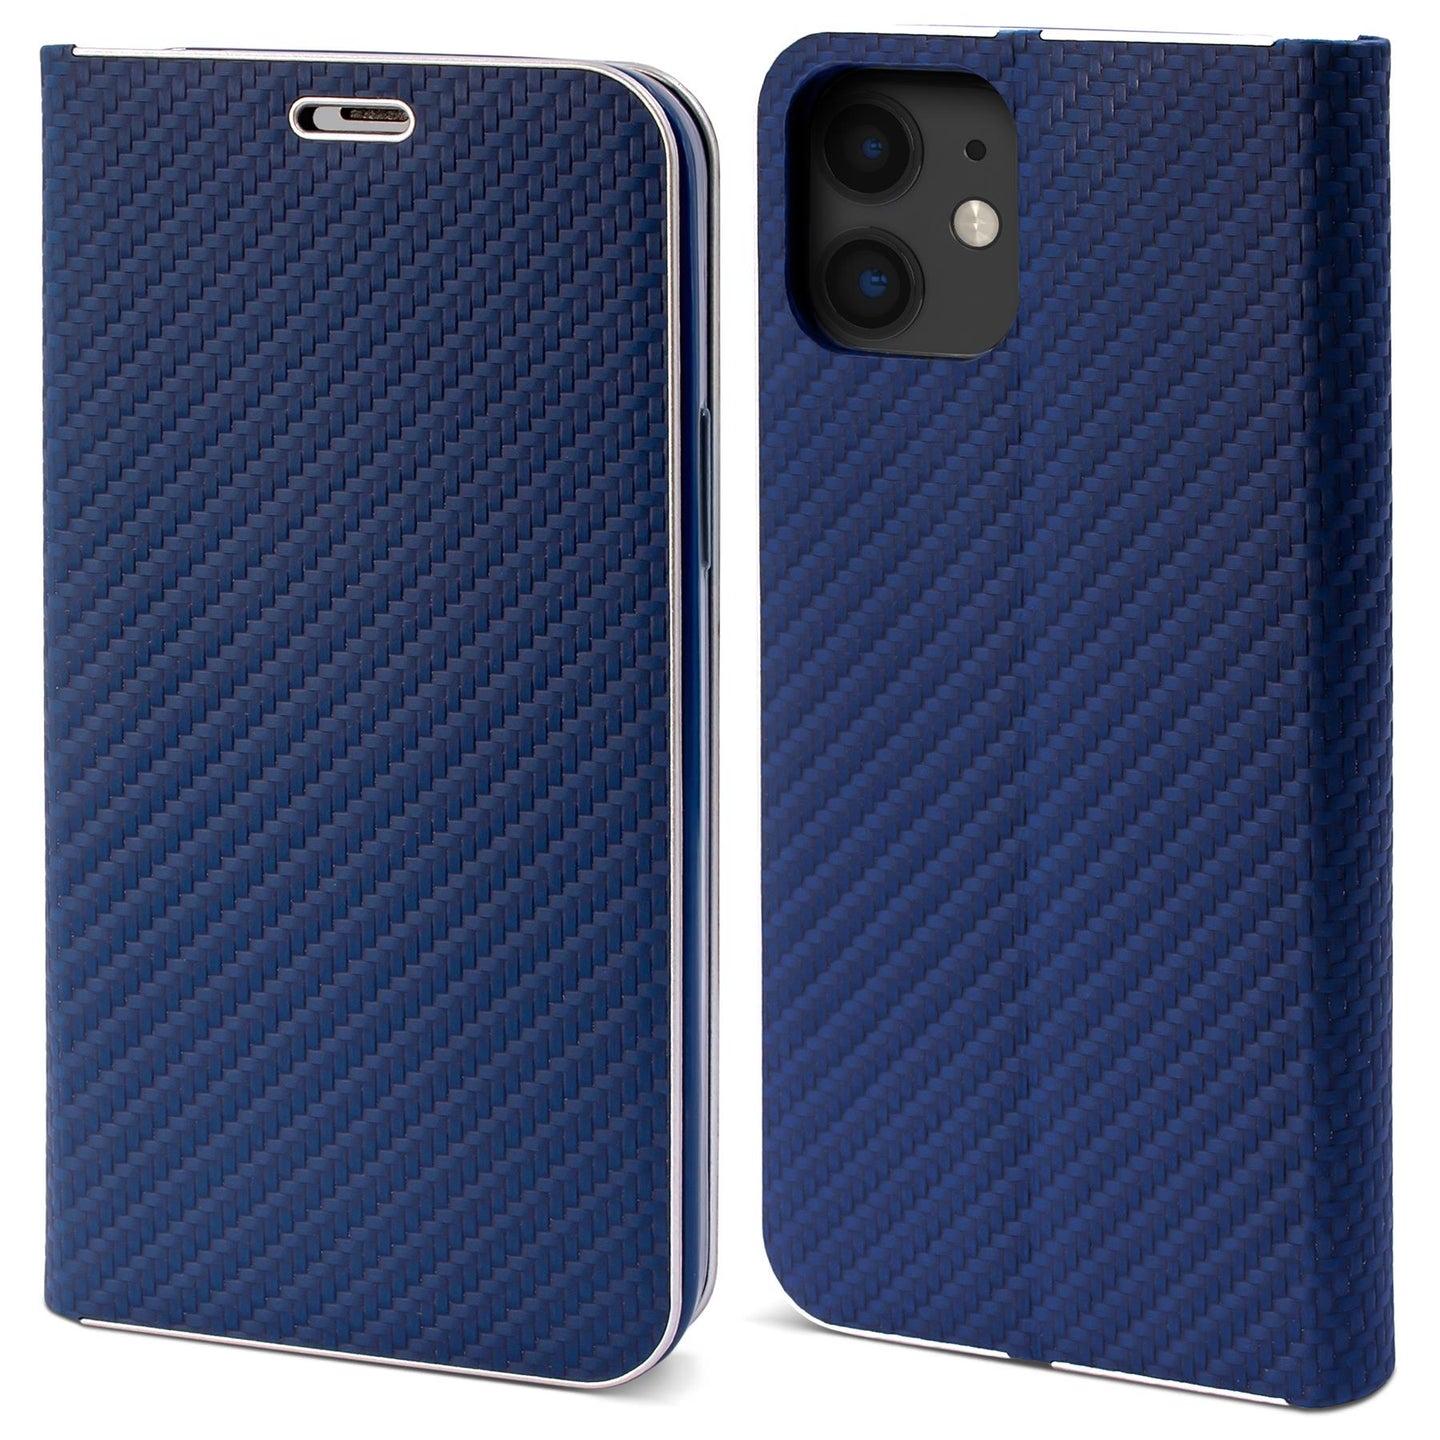 Moozy Wallet Case for iPhone 12 mini, Dark Blue Carbon – Metallic Edge Protection Magnetic Closure Flip Cover with Card Holder